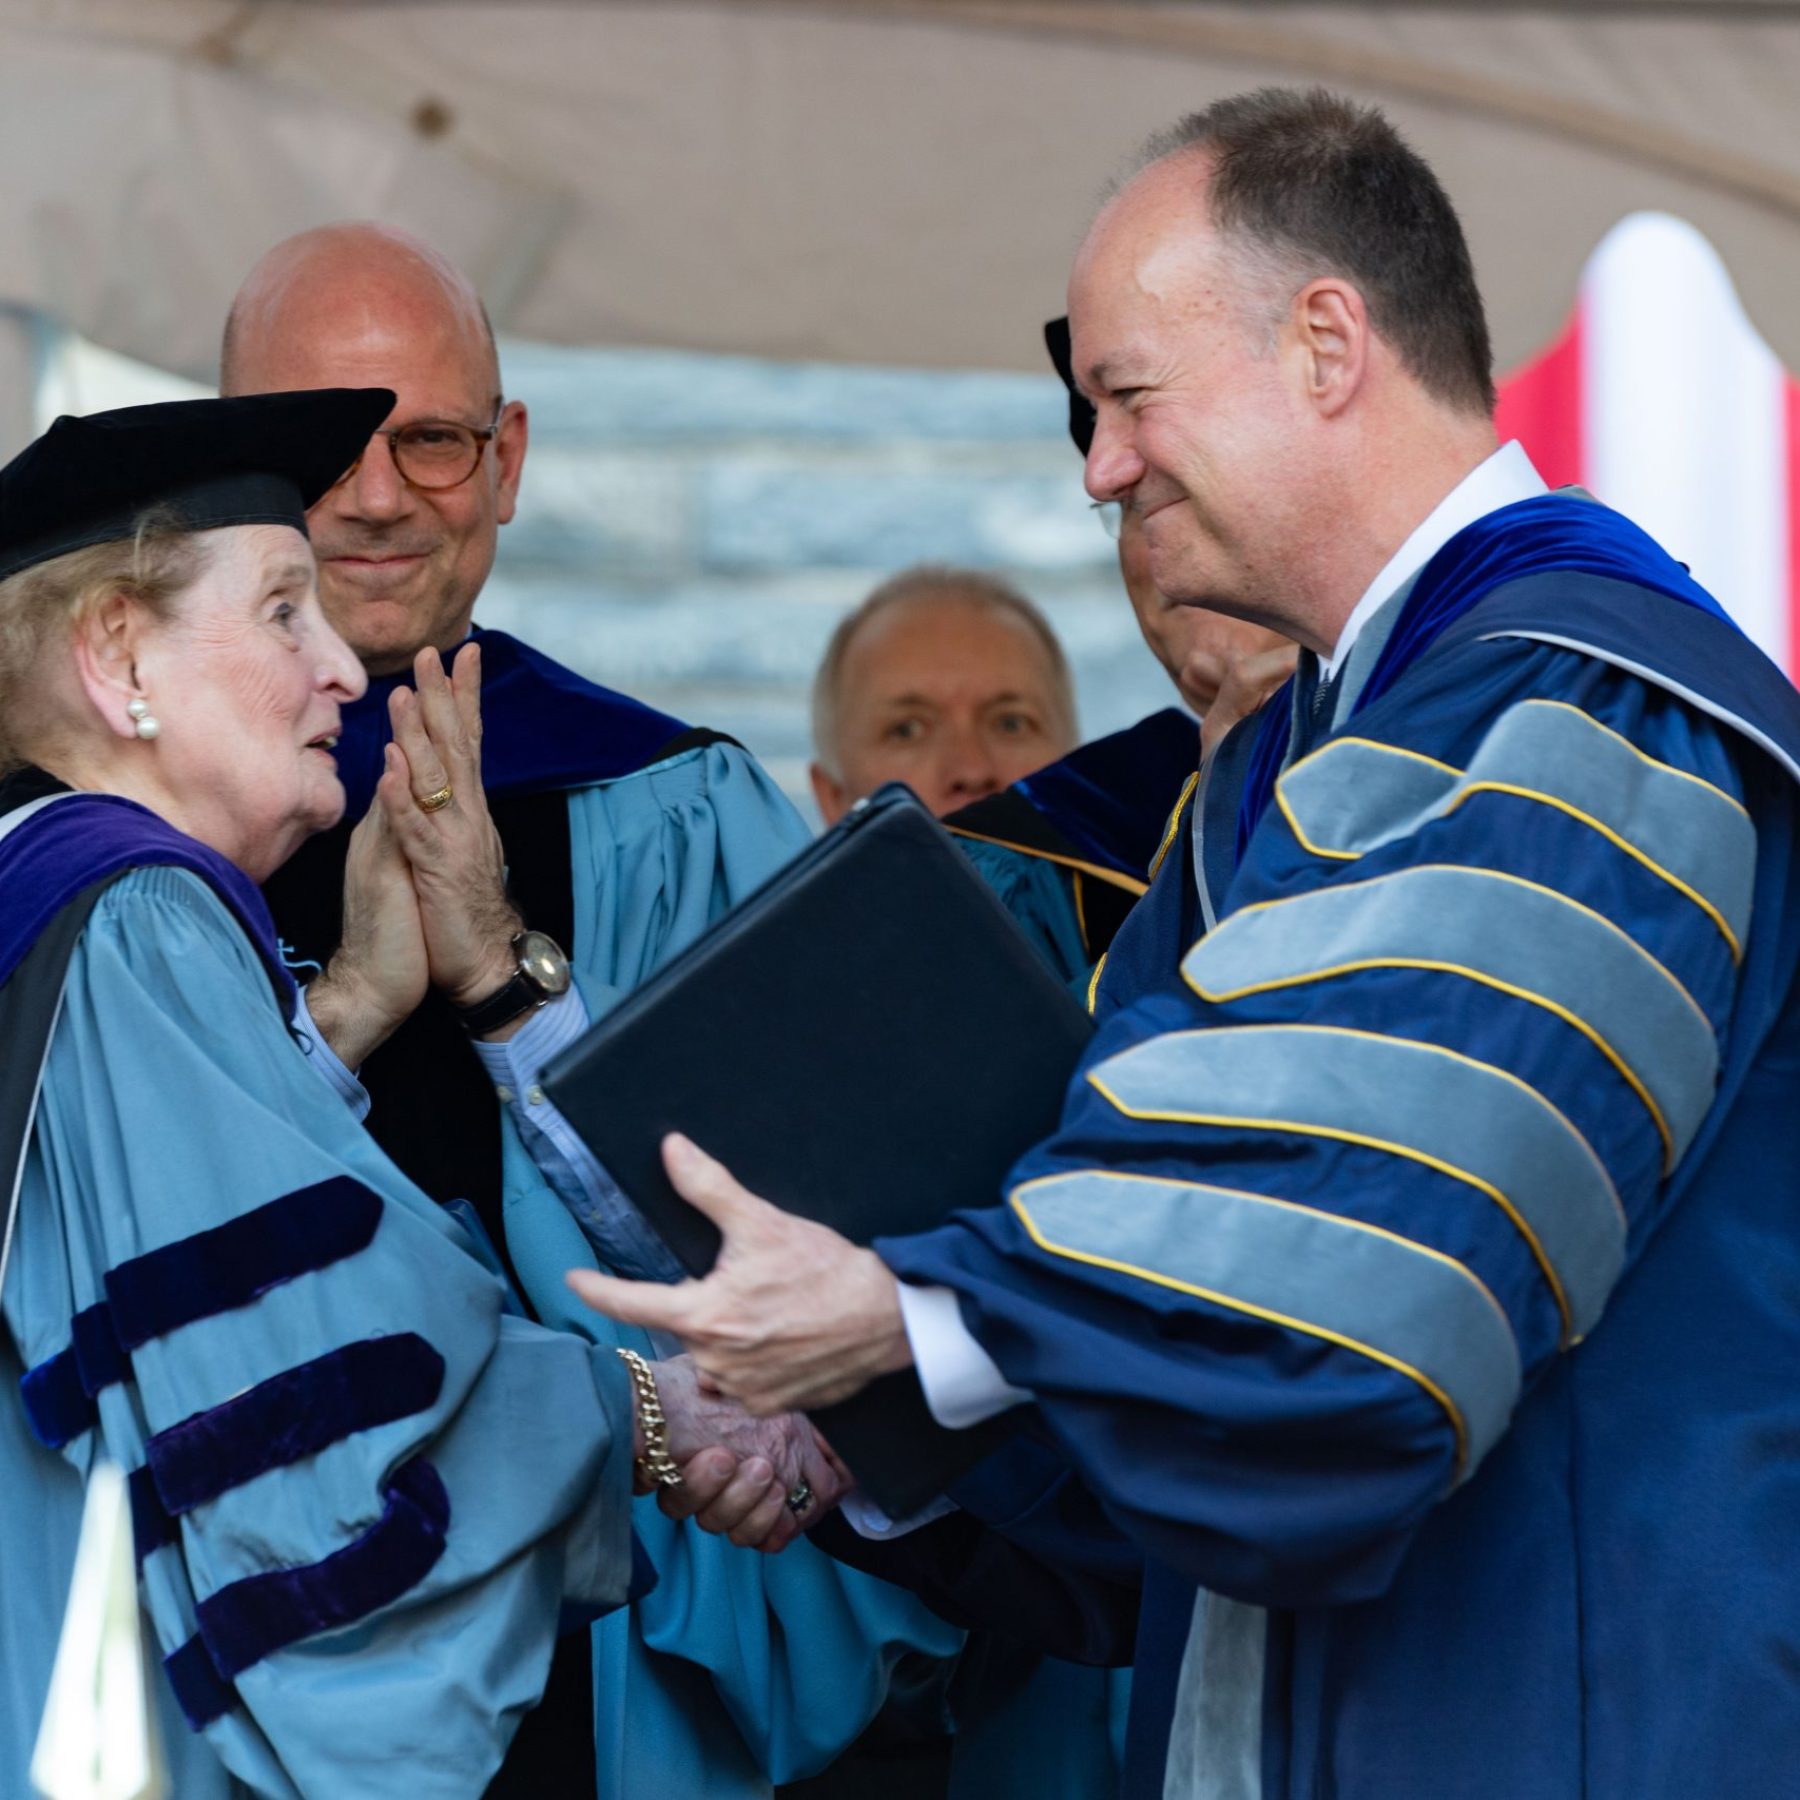 Madeleine Albright and President DeGioia in graduation robes